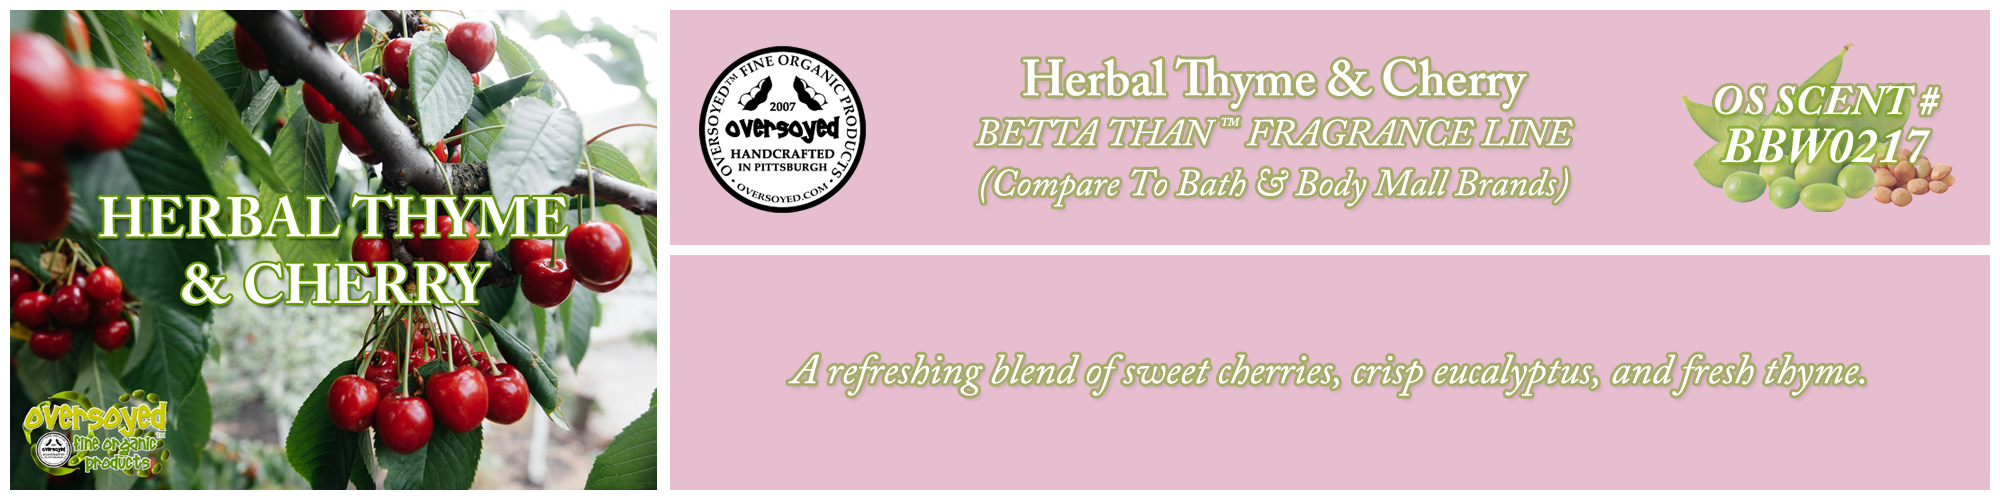 Herbal Thyme & Cherry Handcrafted Products Collection